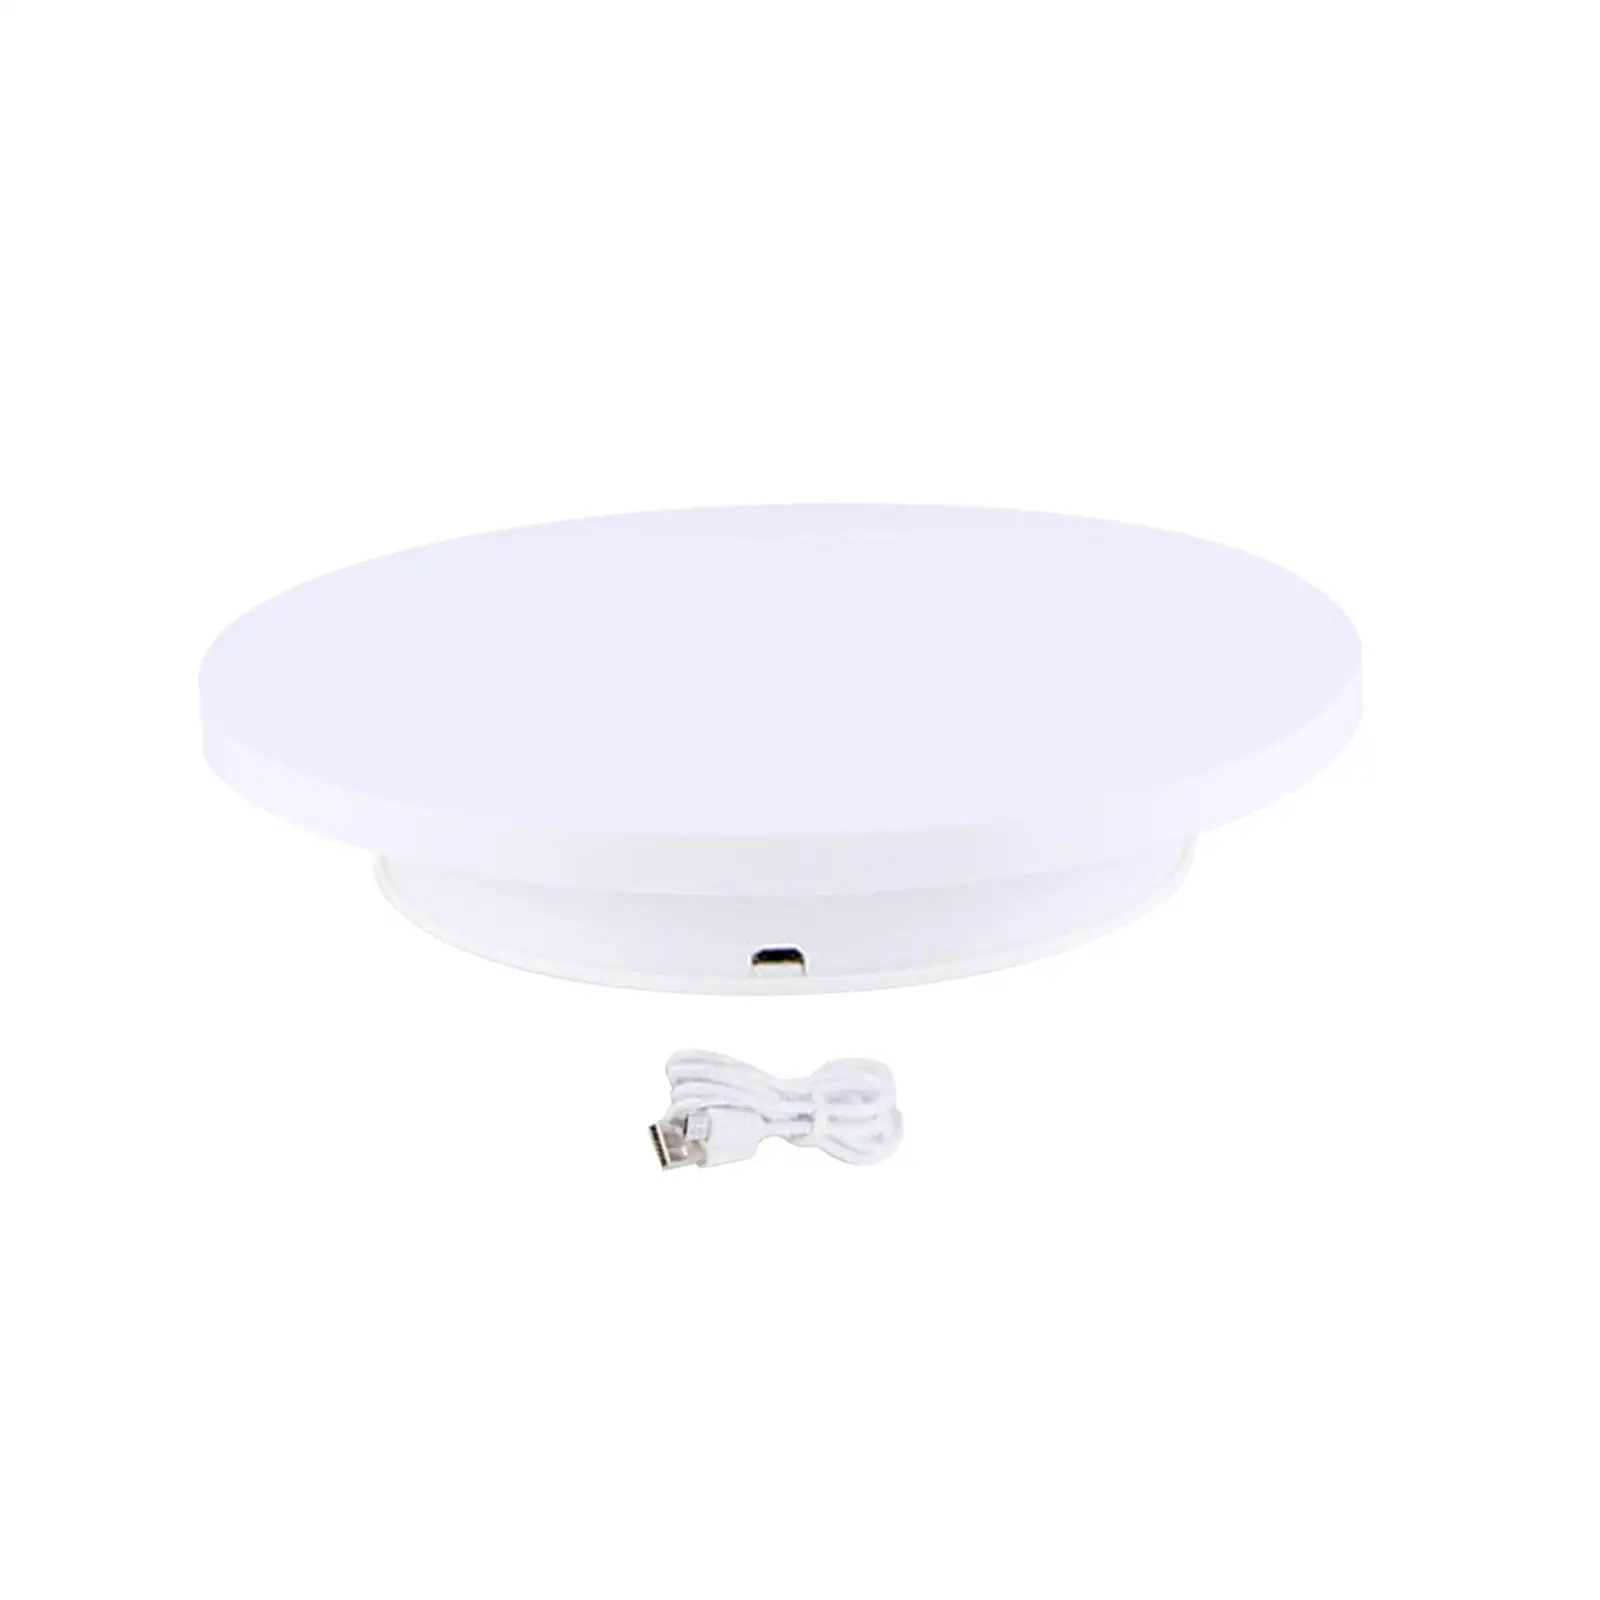 Electronic 360 Degree Rotating Display Stand with USB Cable Rotating Turntable Jewelry Holder for Video Shooting Cake Jewelry